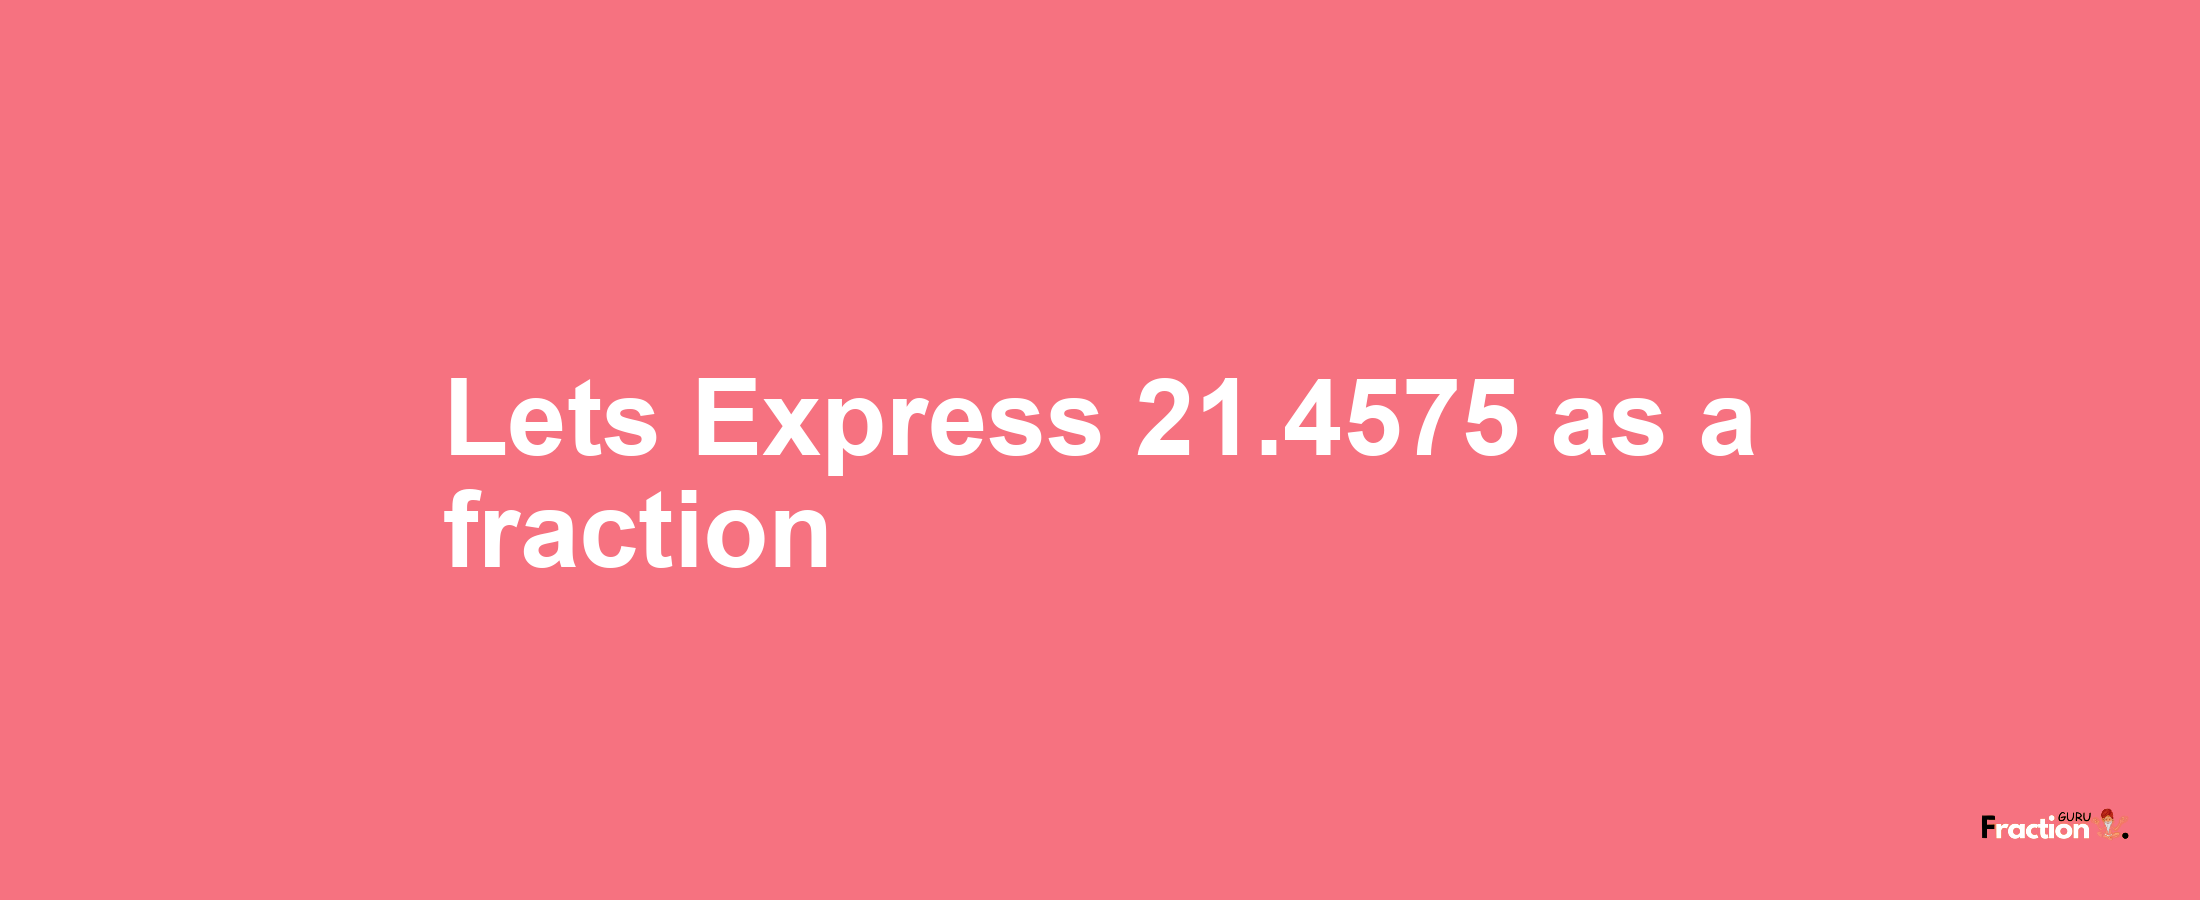 Lets Express 21.4575 as afraction